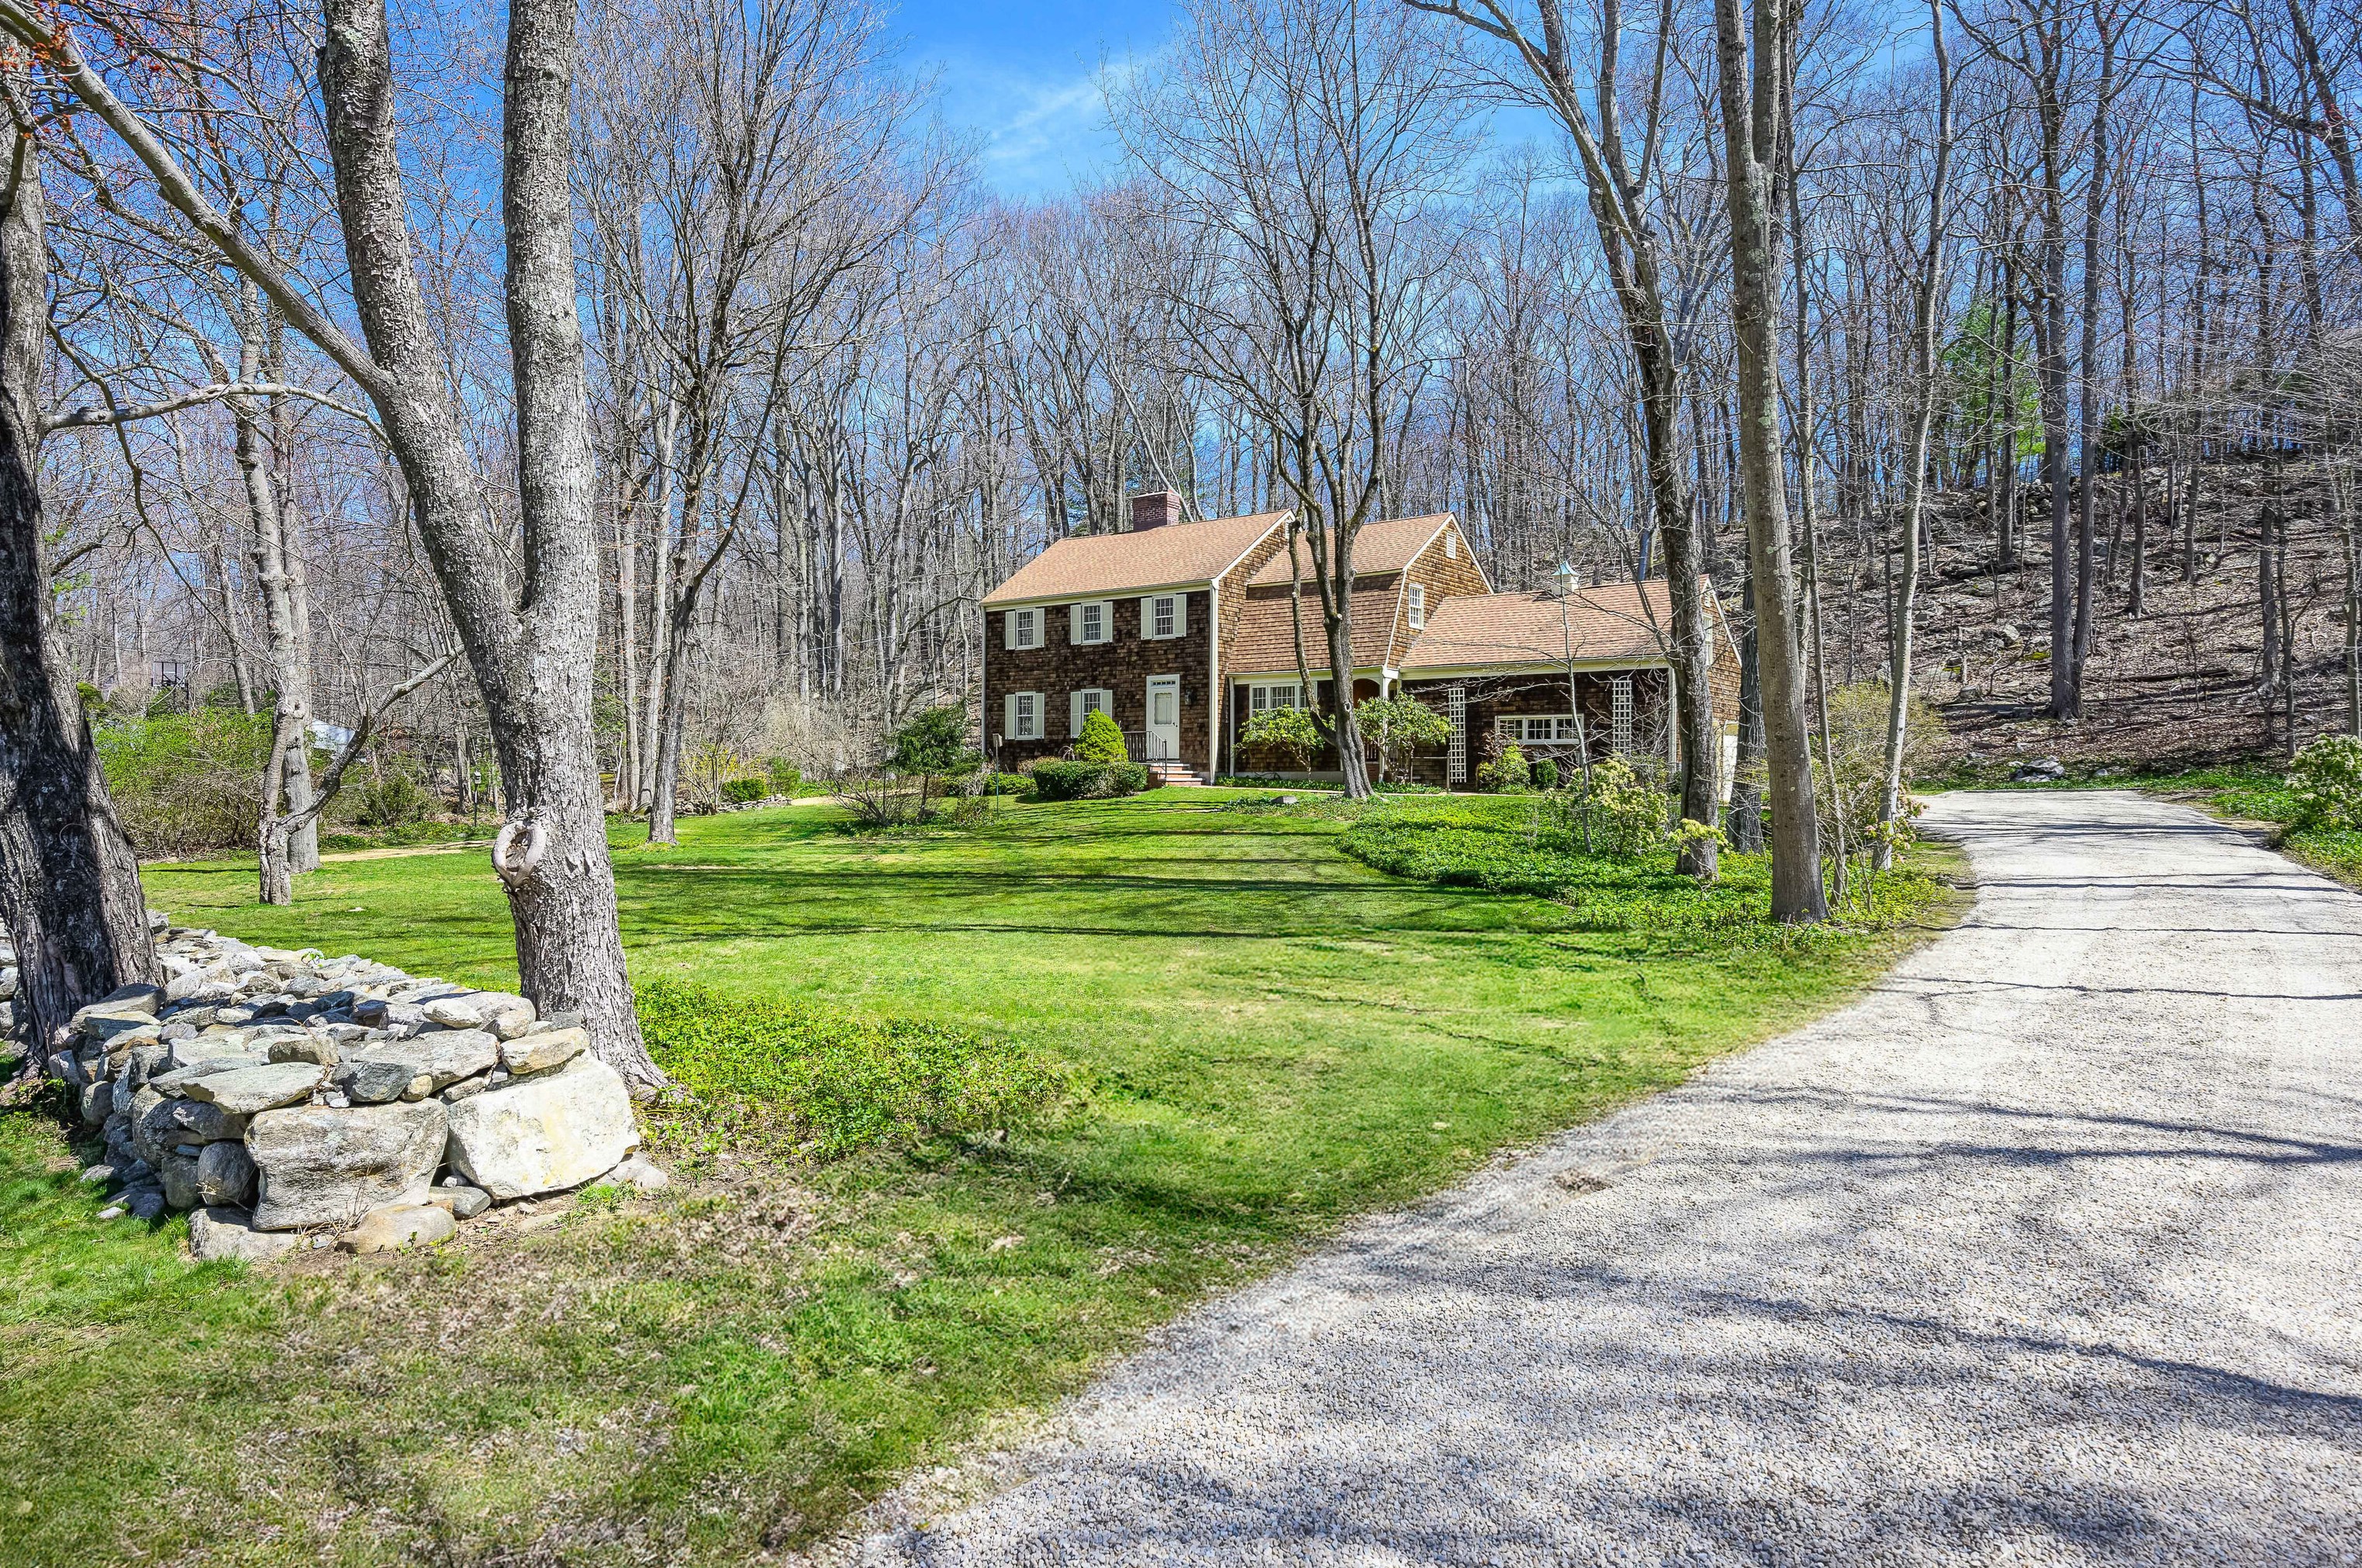 79 Indian Cave Rd, Ridgefield, CT 06877